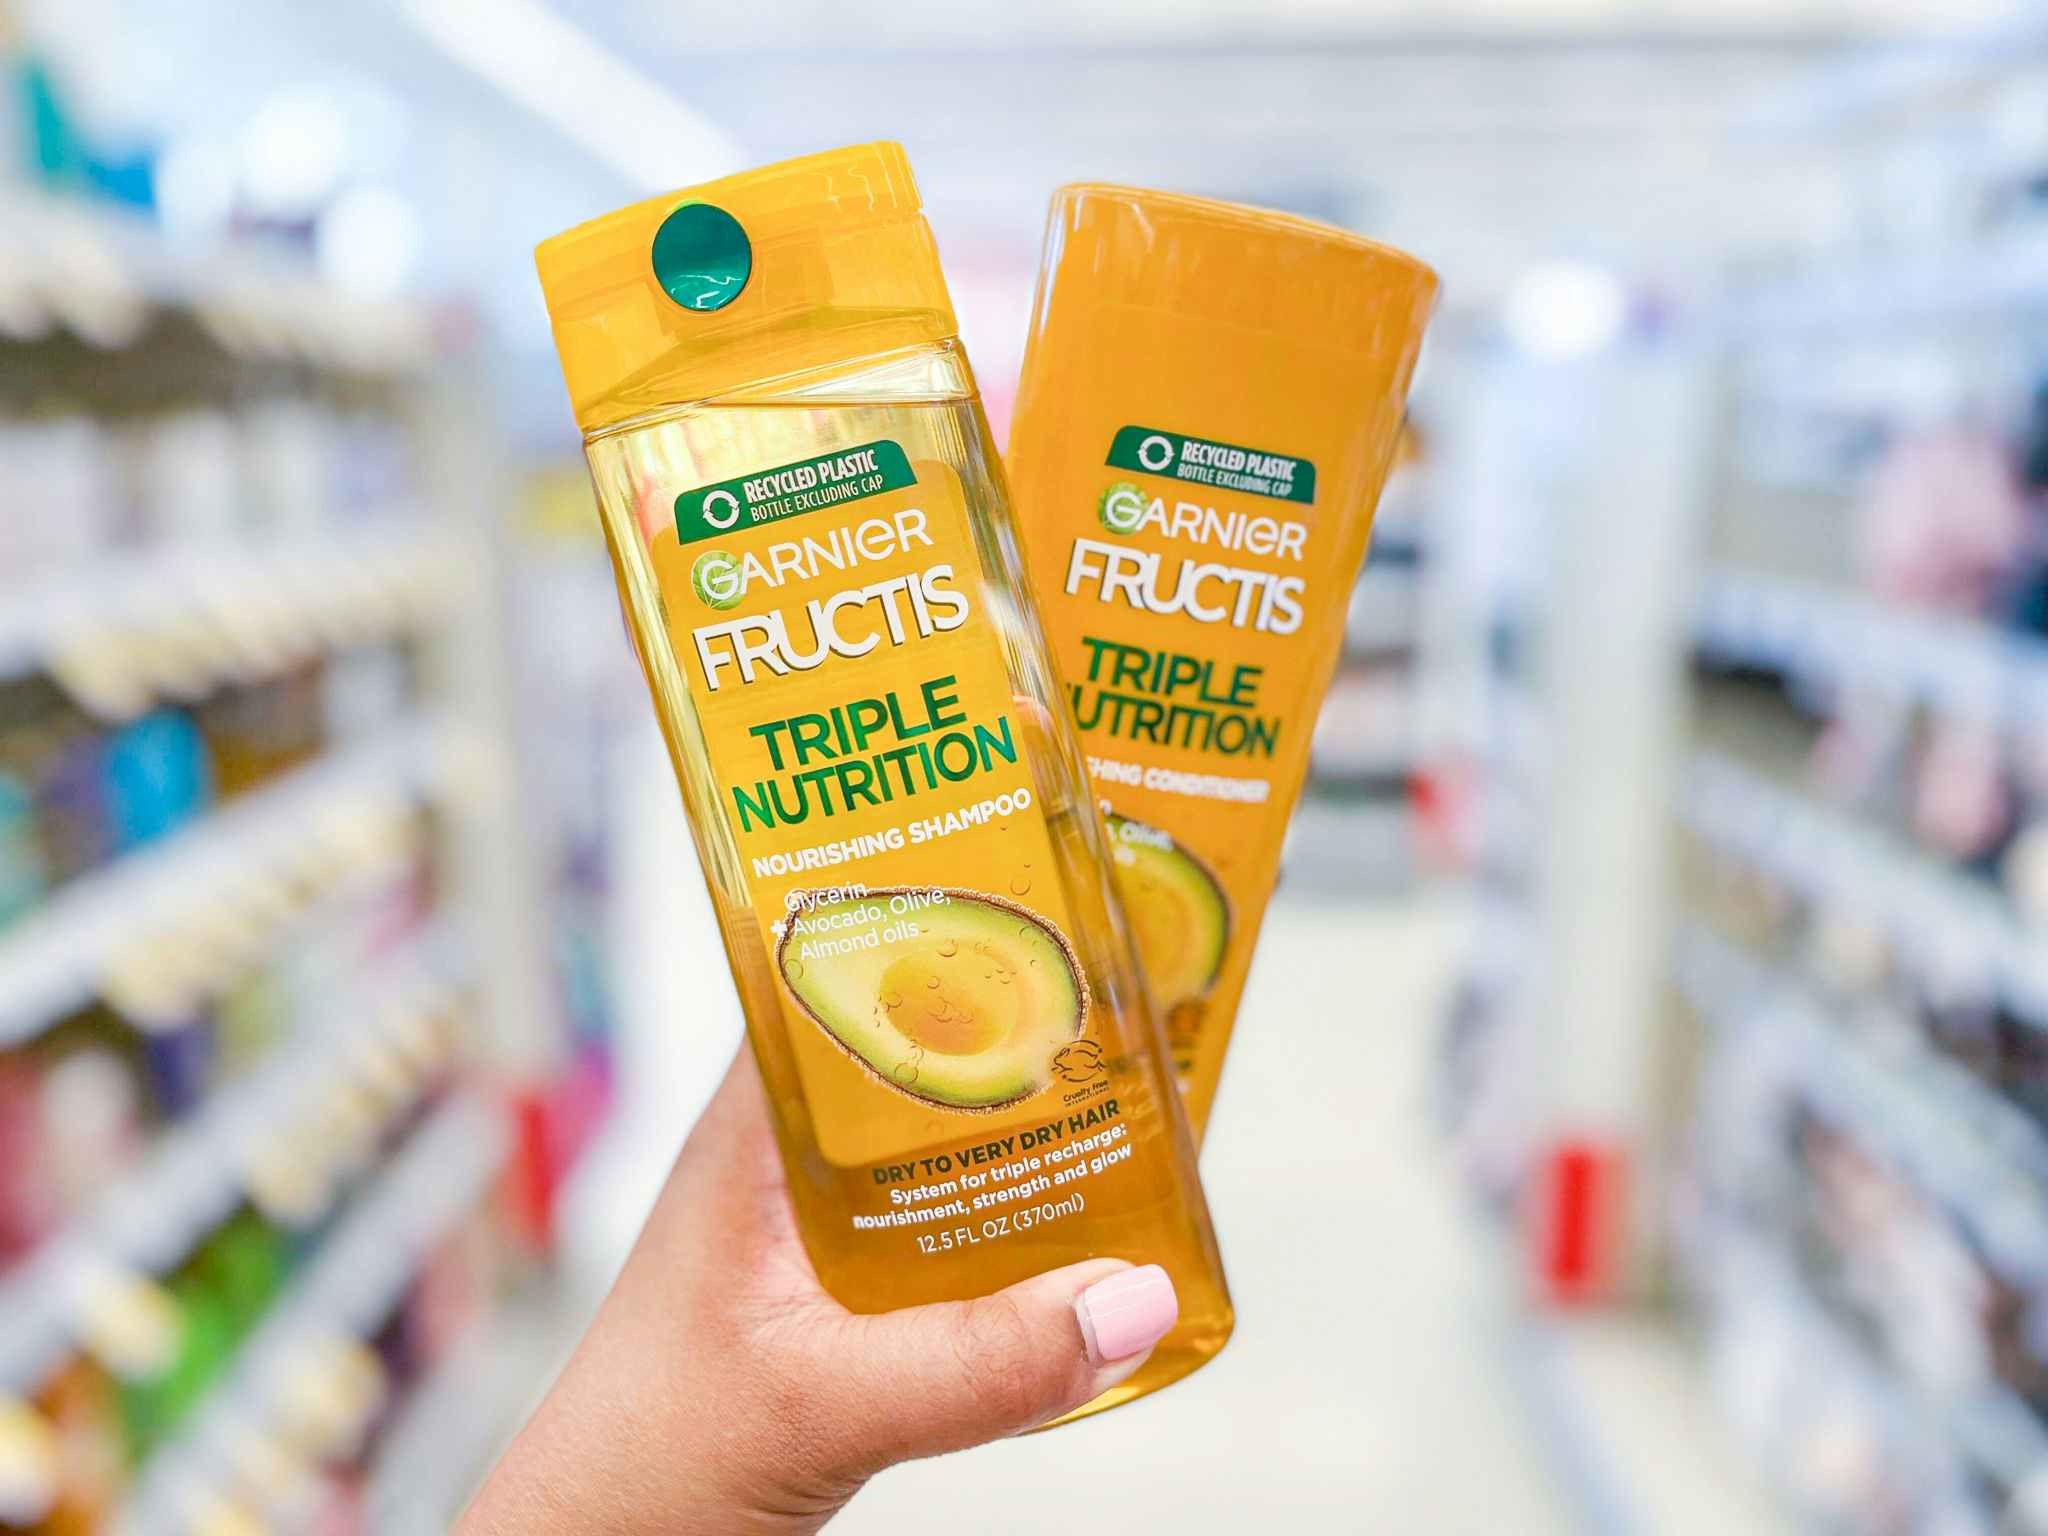 Hand holding a bottle of Garnier Fructis Triple Nutrition Shampoo and Conditioner in aisle